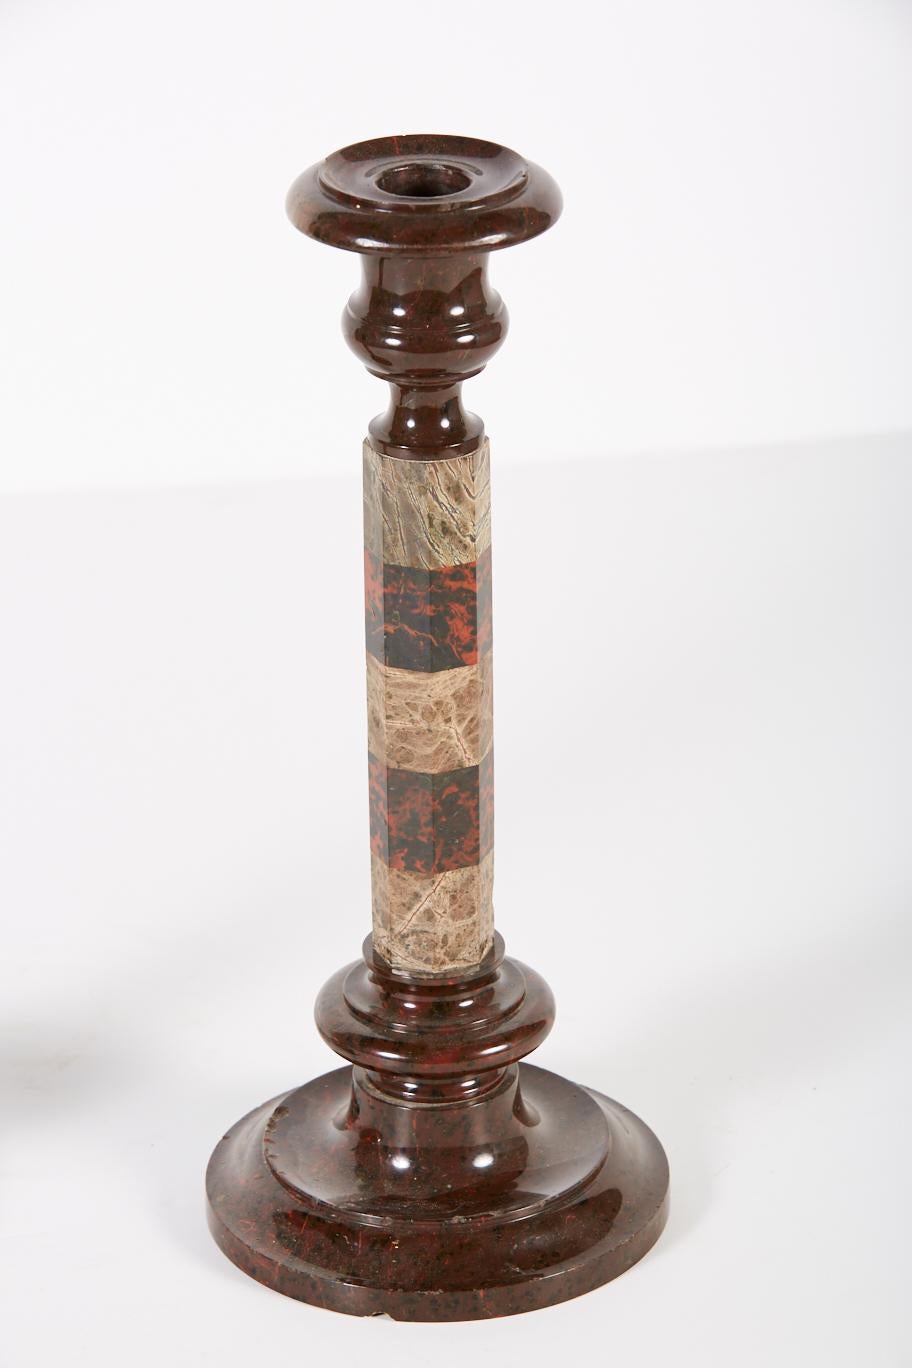 Pair of 19th century English candlesticks in red and green serpentine, a stone that is unique to England's Cornish region. Objects made from this stone were popularized by Queen Victoria and Prince Albert when they placed an order for Cornish